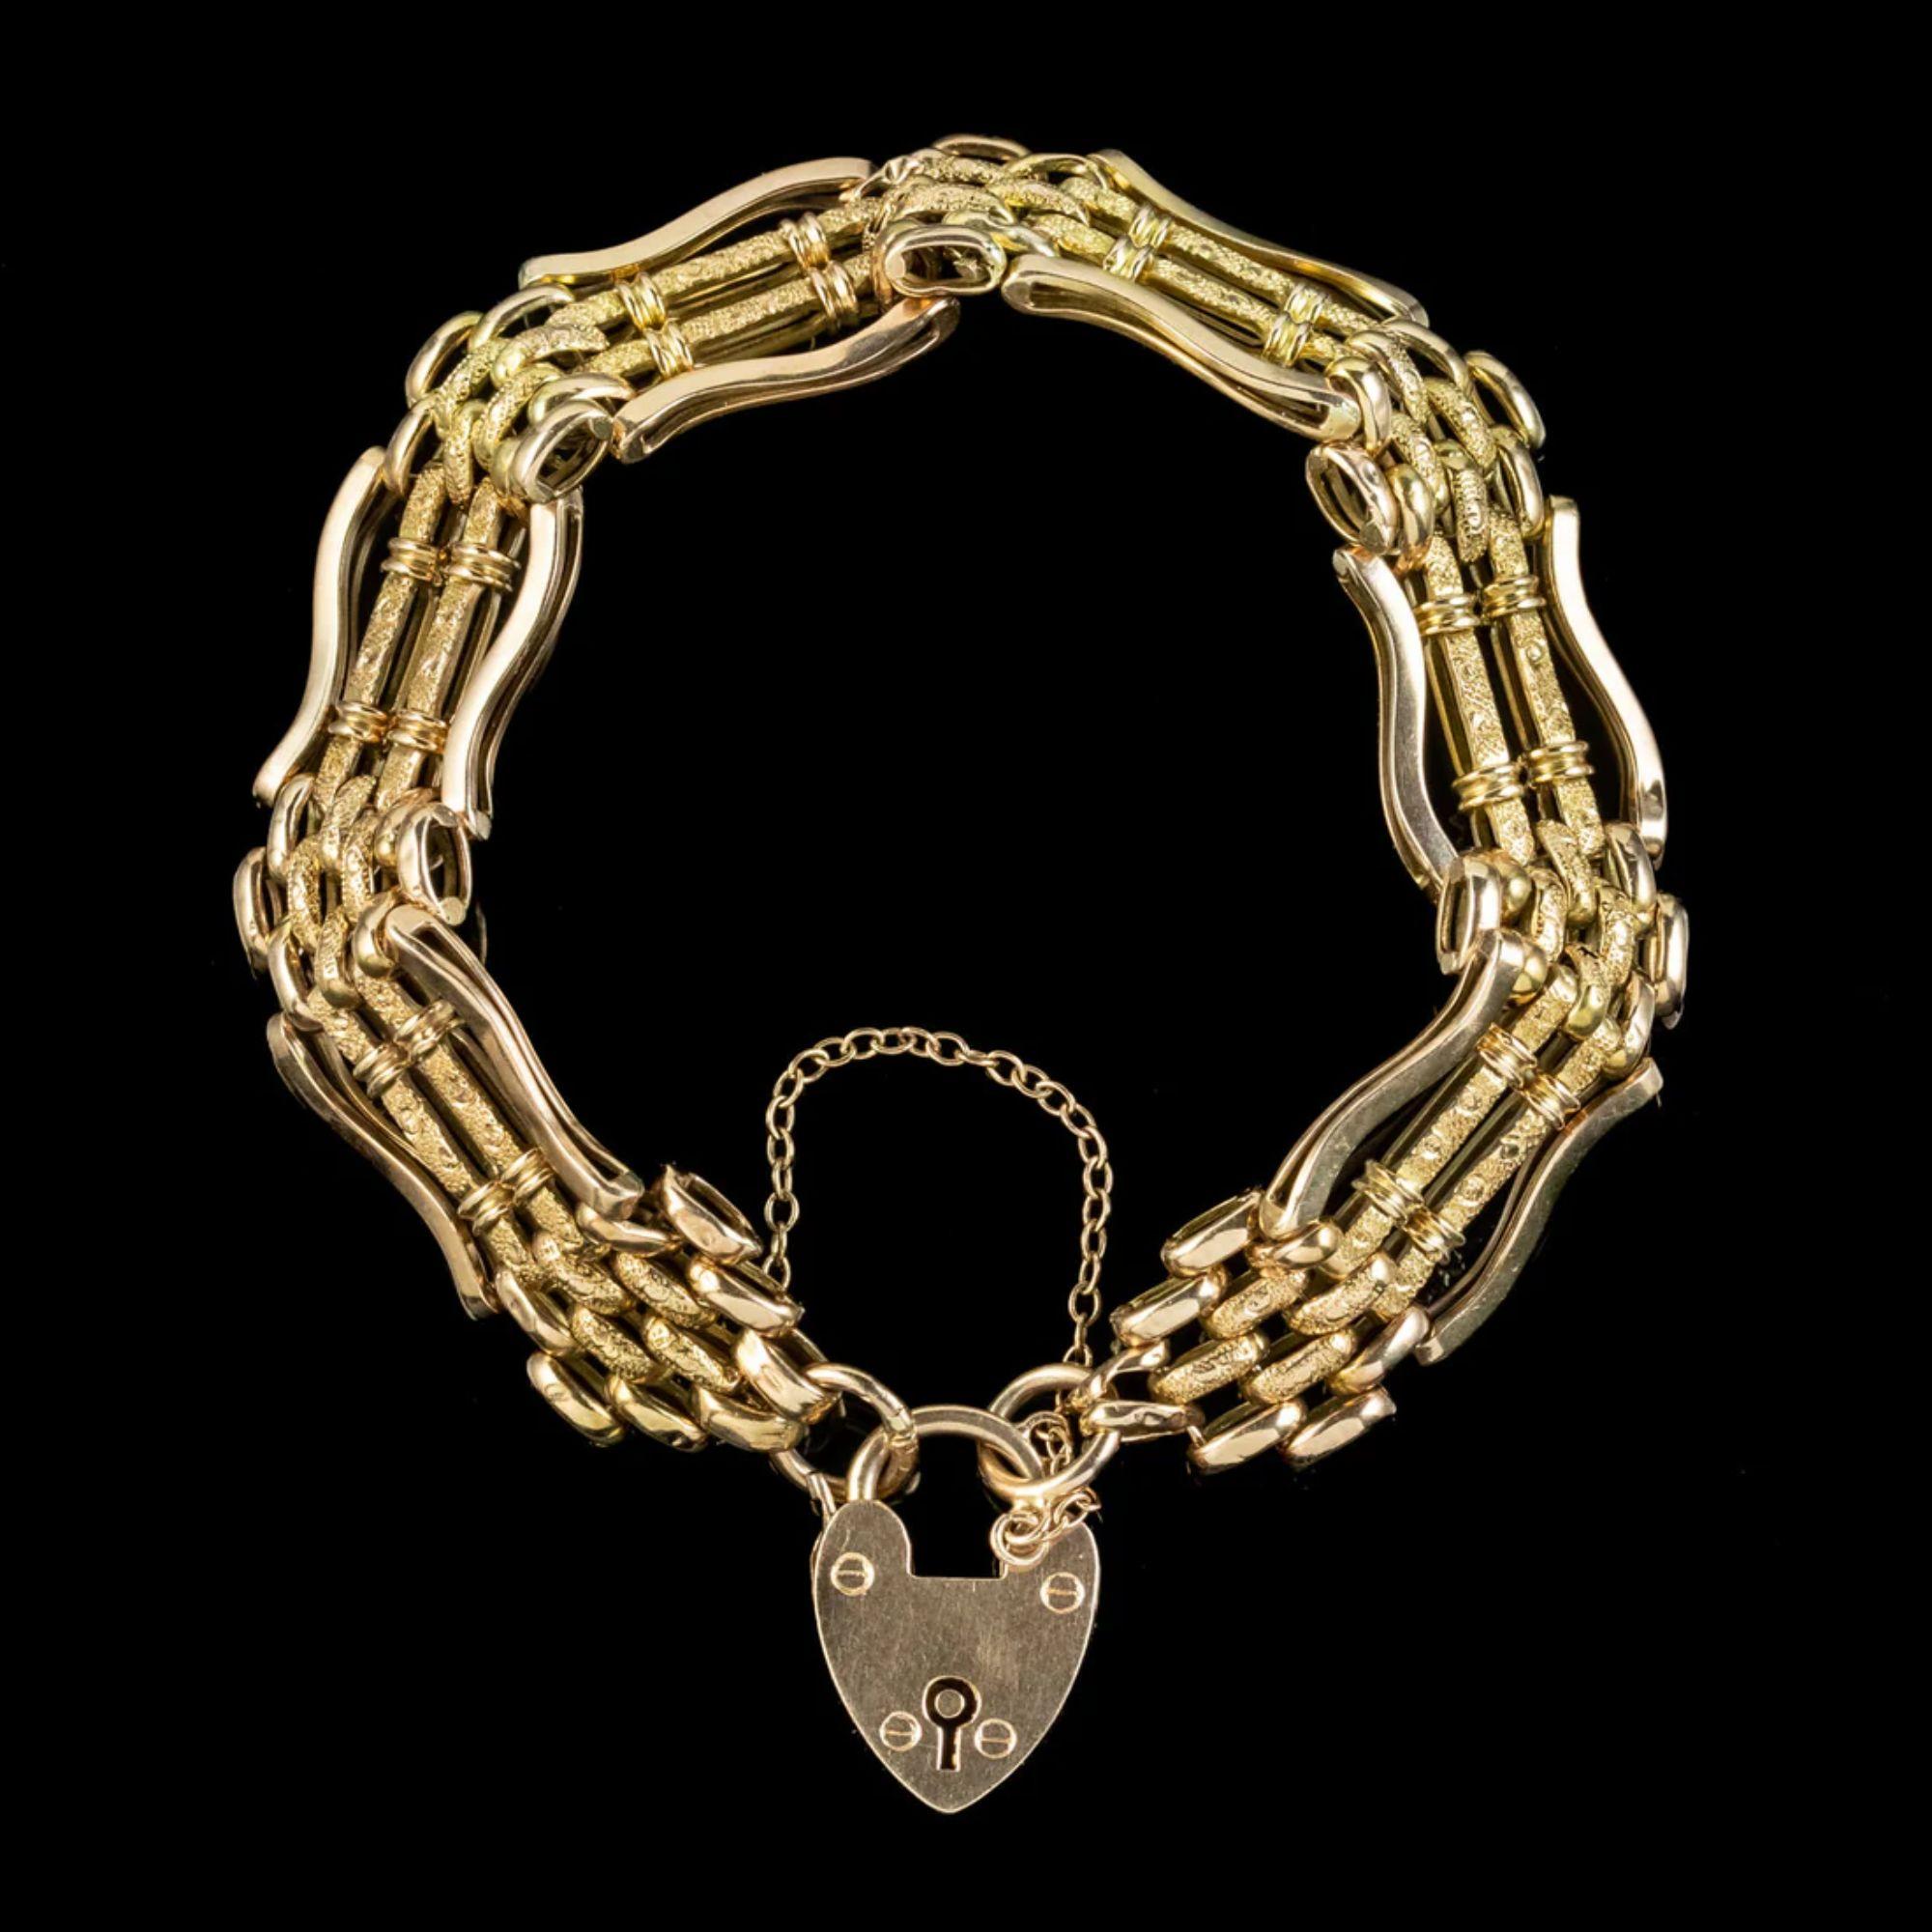 A romantic antique Victorian gate bracelet from the late 19th Century fashioned entirely in 9ct gold. The band consists of curved gate links etched with textured patterning across the centre and are held by a safety chain and heart padlock clasp,